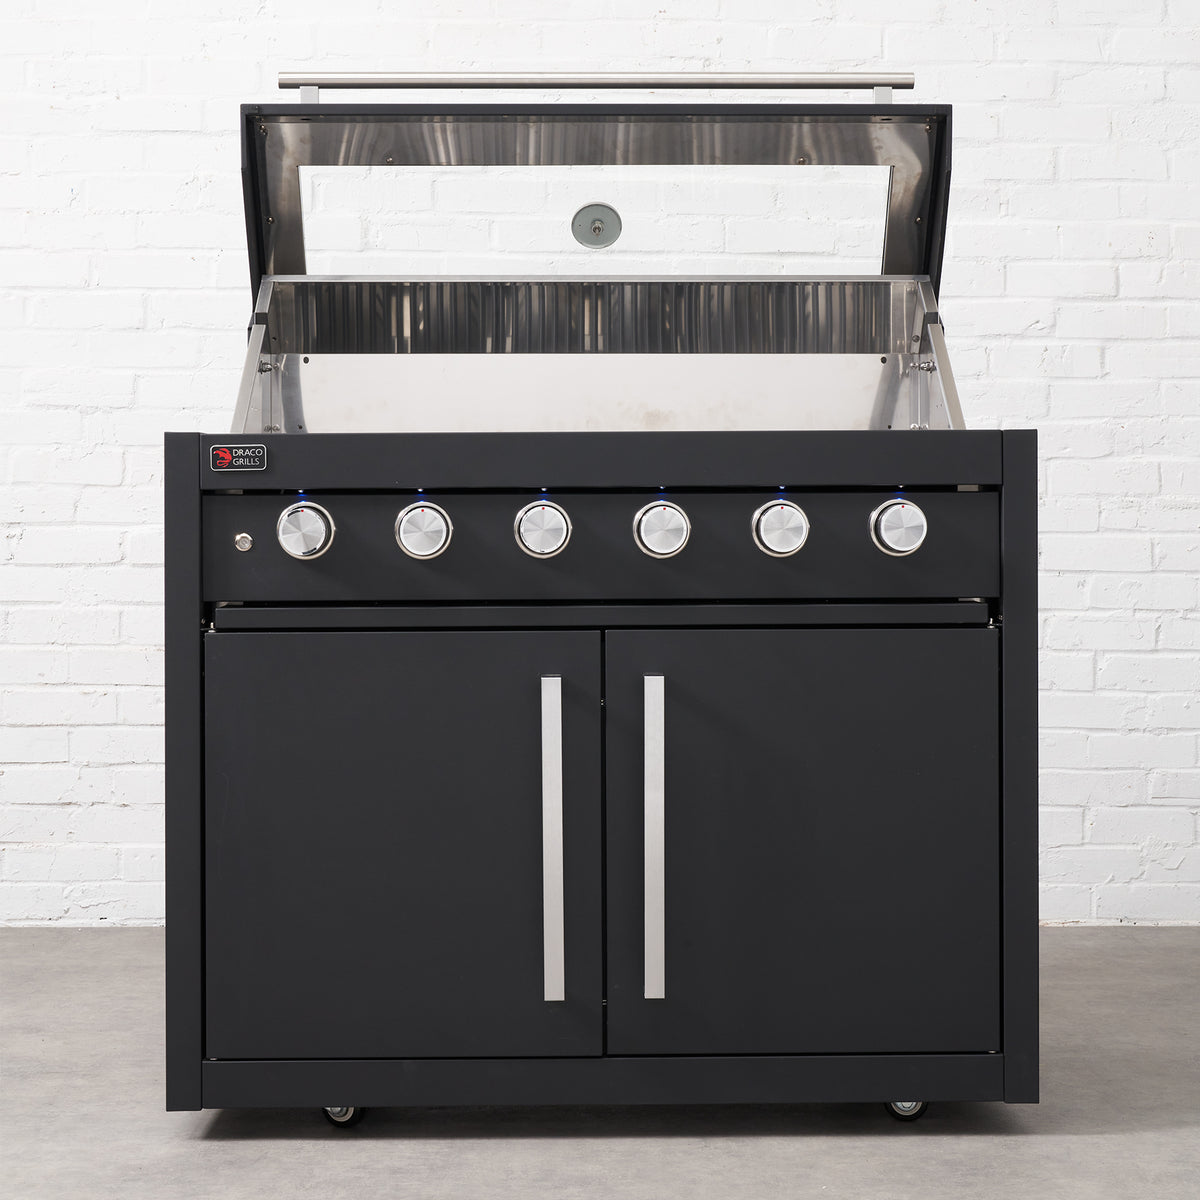 Draco Grills Fusion 6 Burner Black Outdoor Kitchen with Modular Single Fridge and Double Cupboard